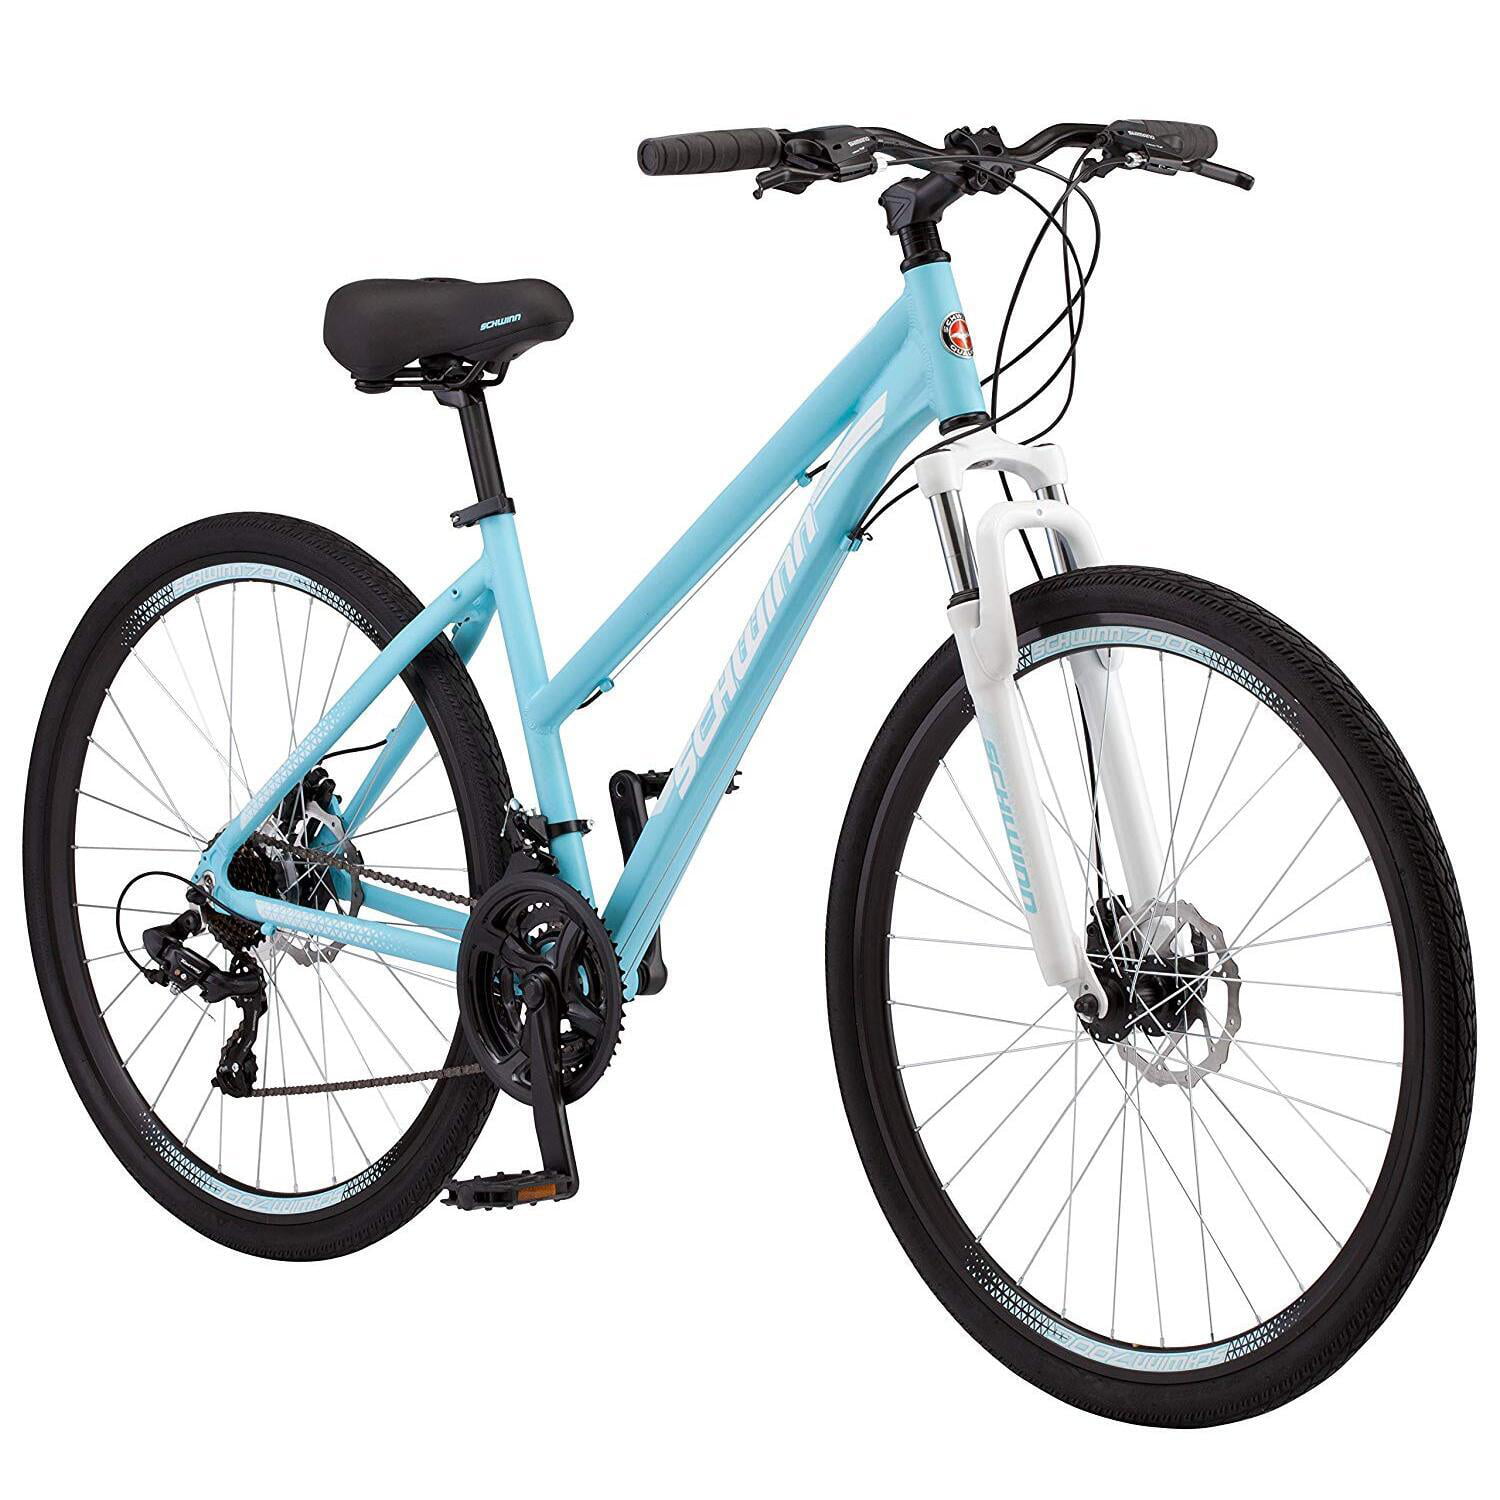 Sonoma Womens Chainless Drive Evolution Urban Commuter Bicycle